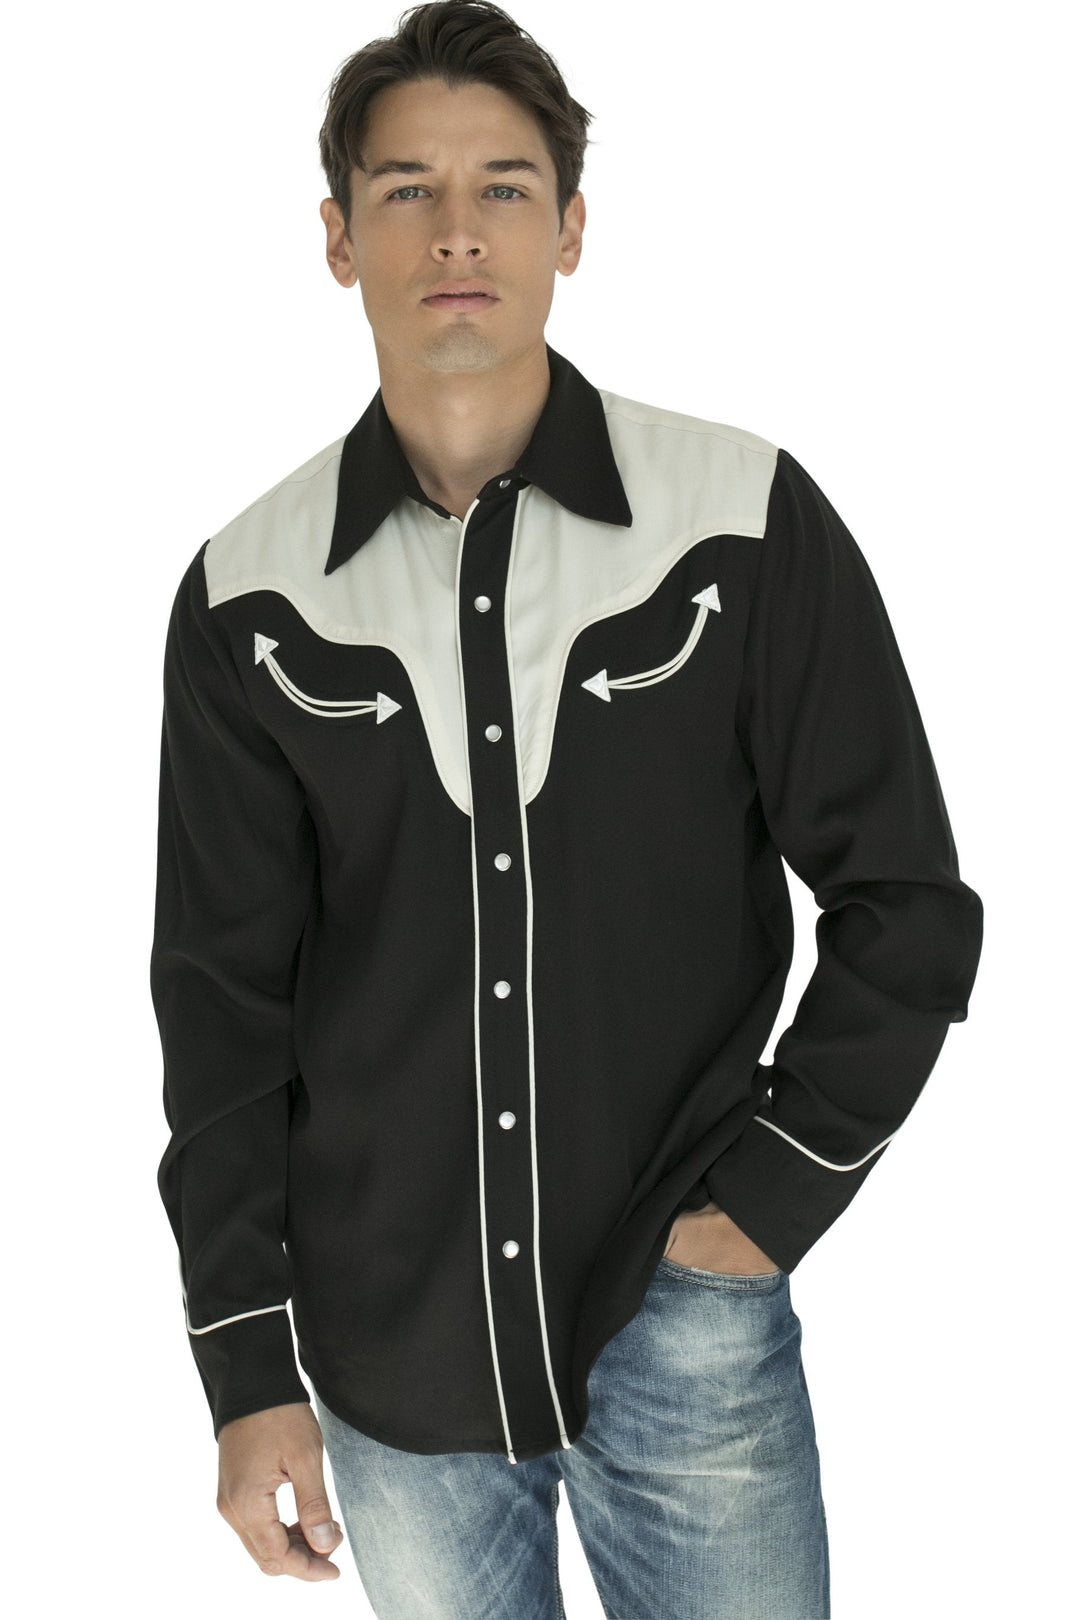 Two-tone smile pocket western shirt in black and grey Tencel